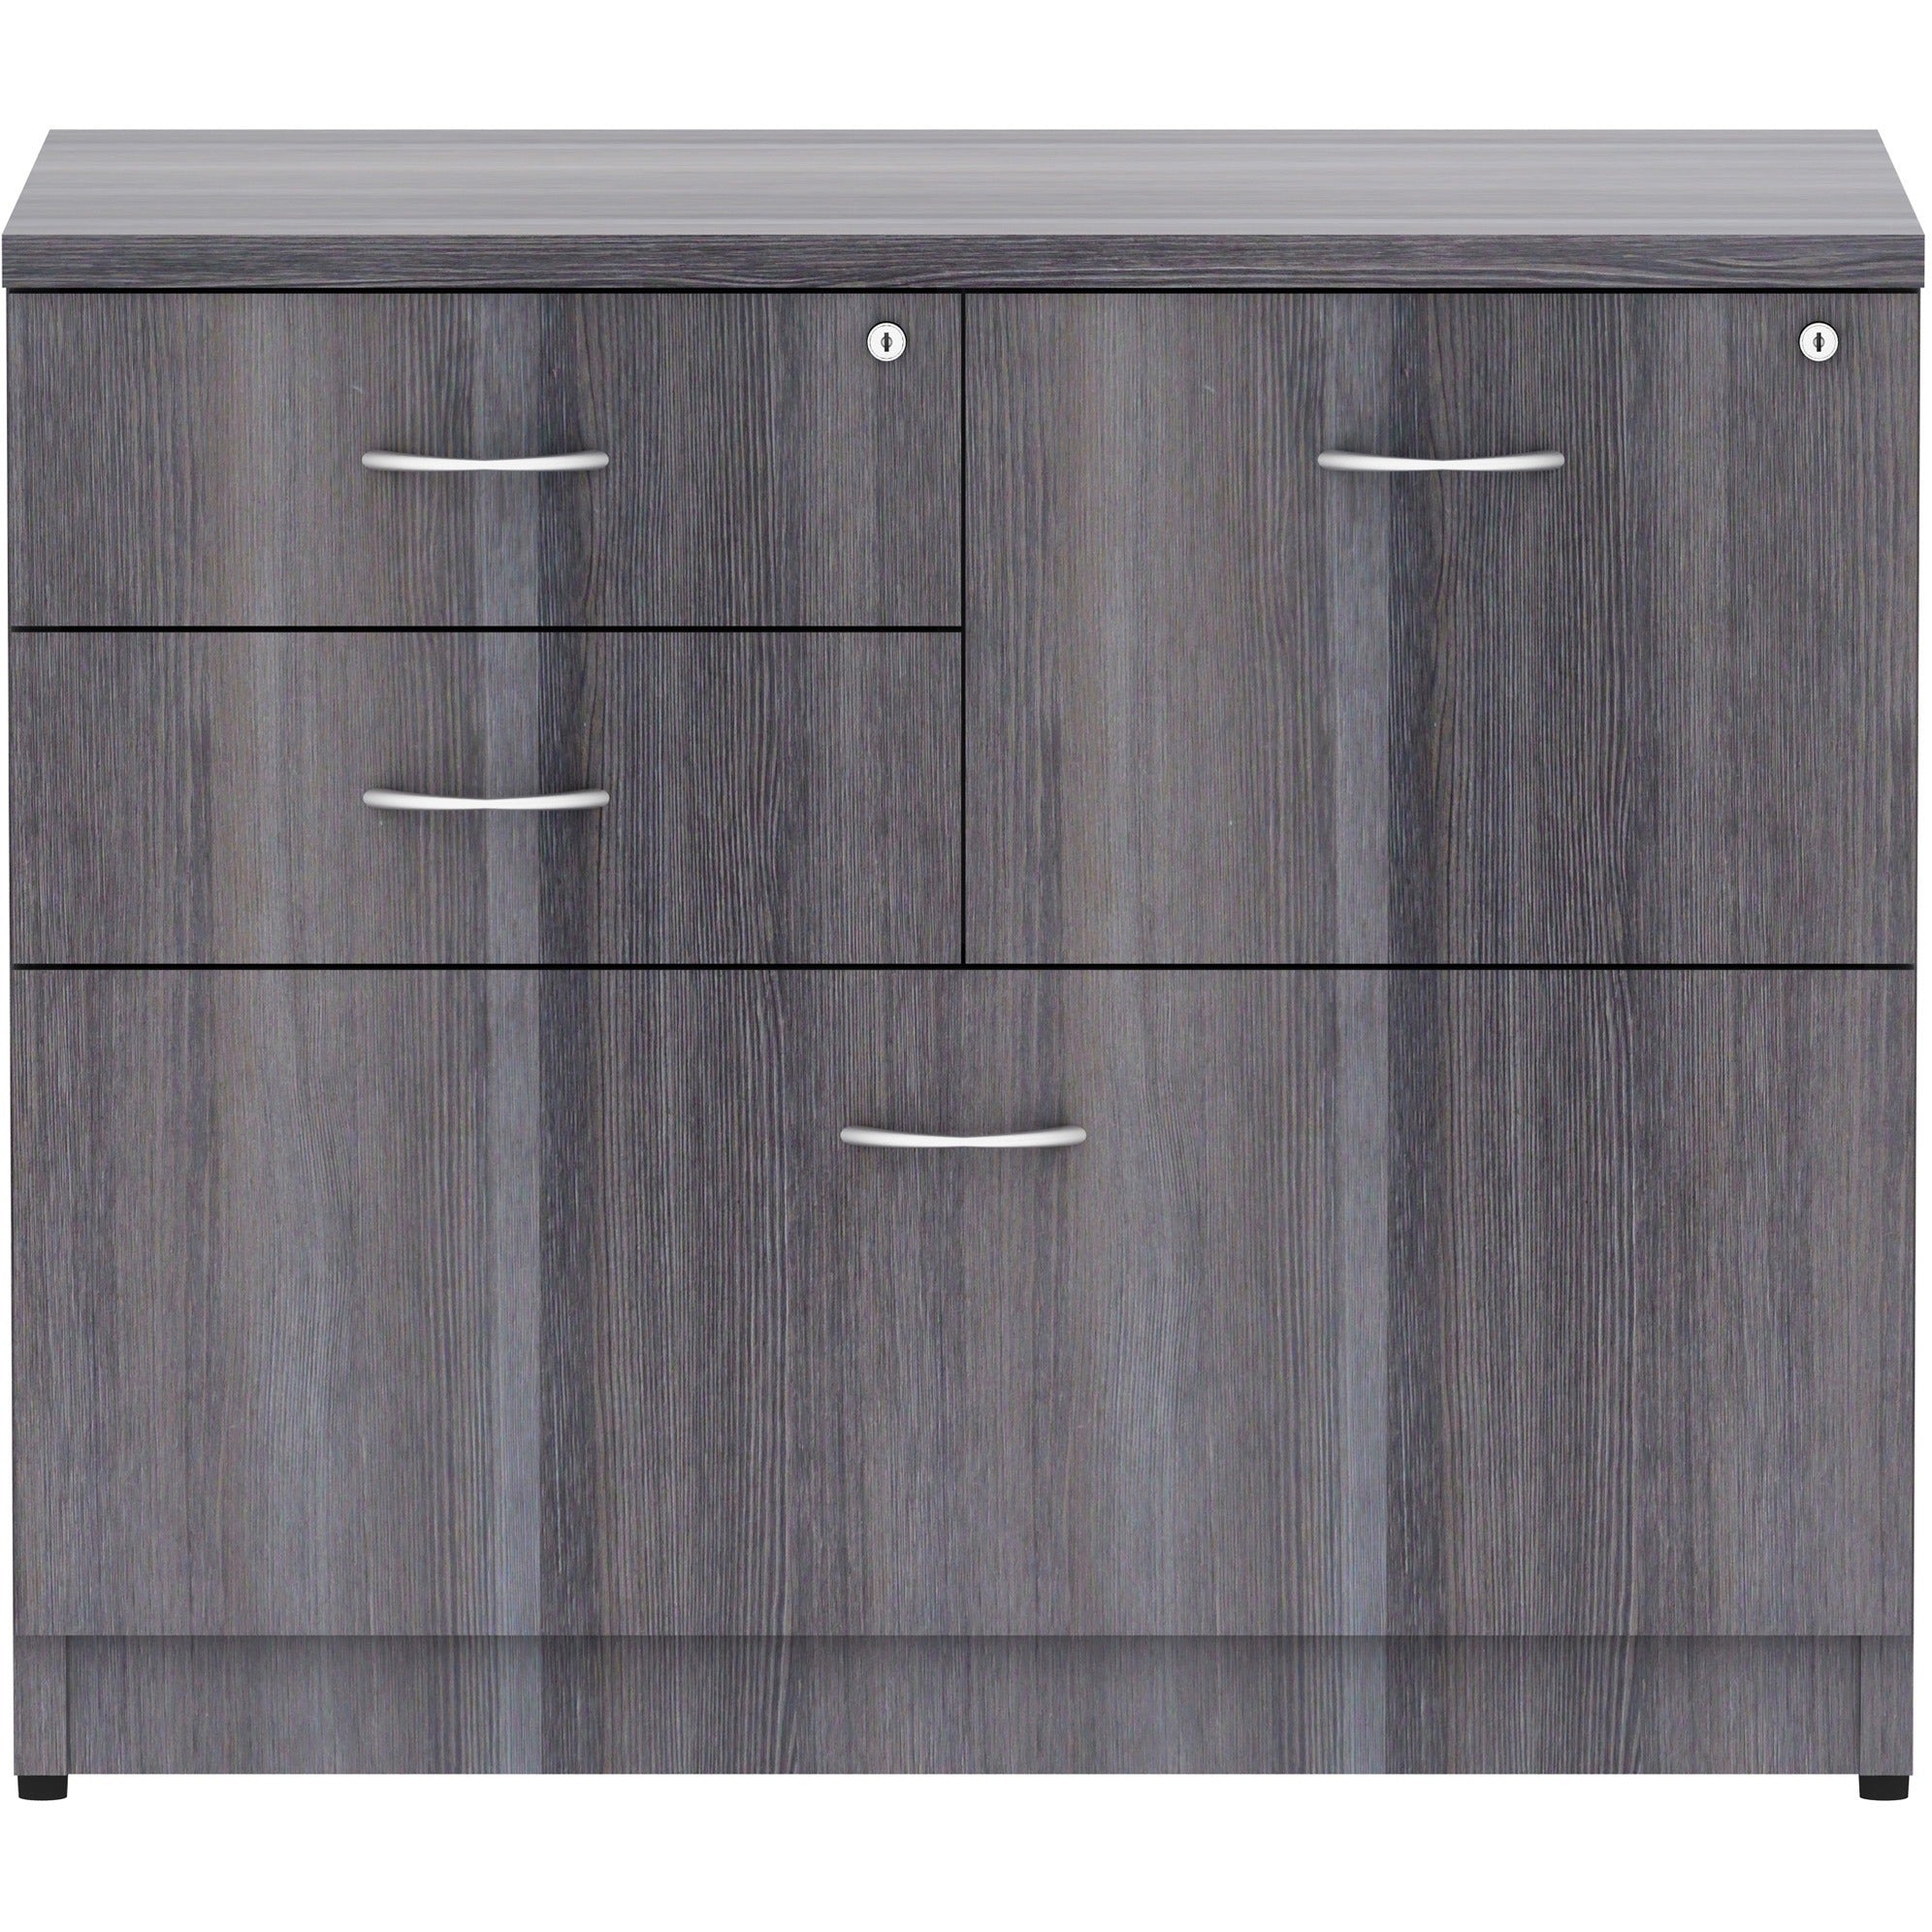 lorell-essentials-series-box-box-file-lateral-file-355-x-22295-lateral-file-1-top-4-x-file-box-drawers-finish-weathered-charcoal-laminate_llr69623 - 2